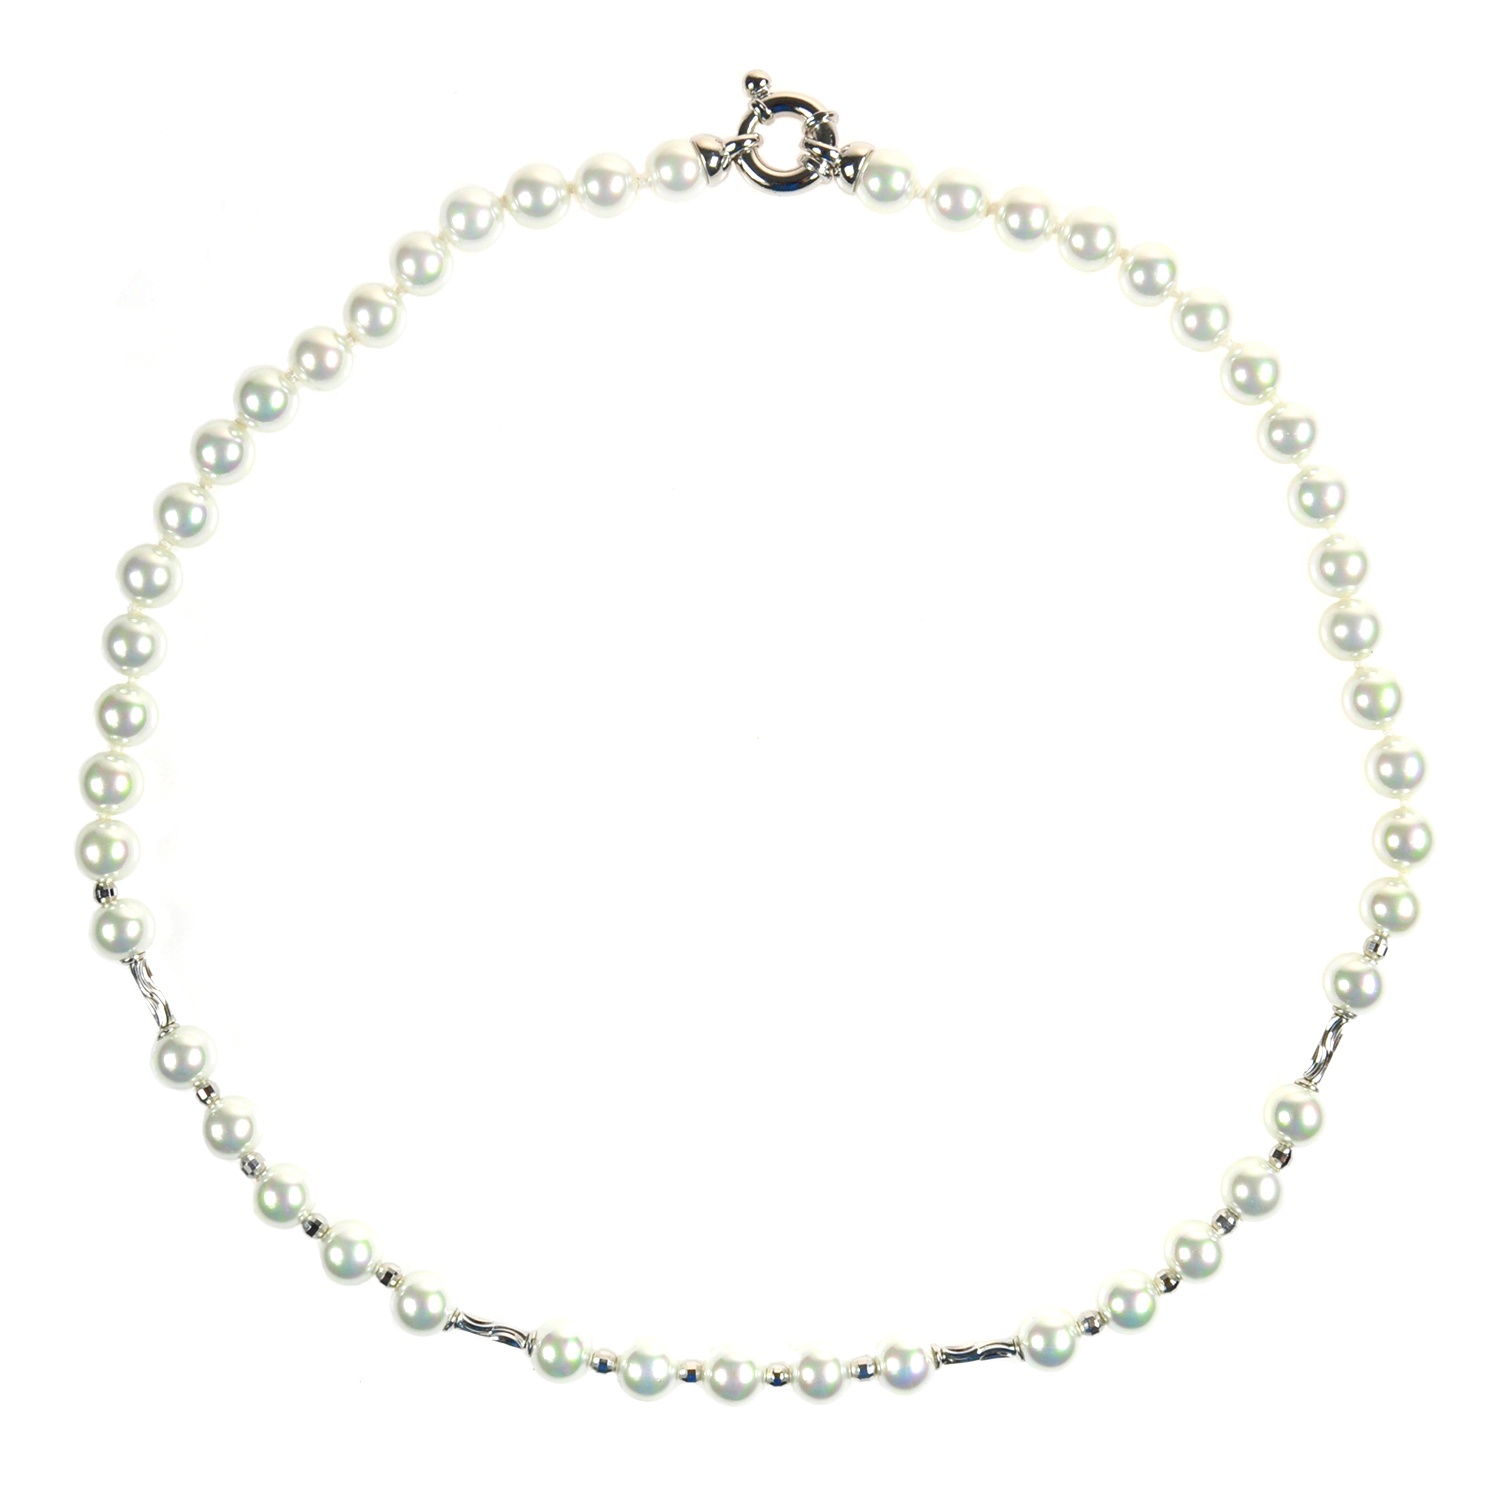 White 6-7mm Freshwater Pearl 45cm Necklace with Sterling Silver Clasp –  Silver Chic